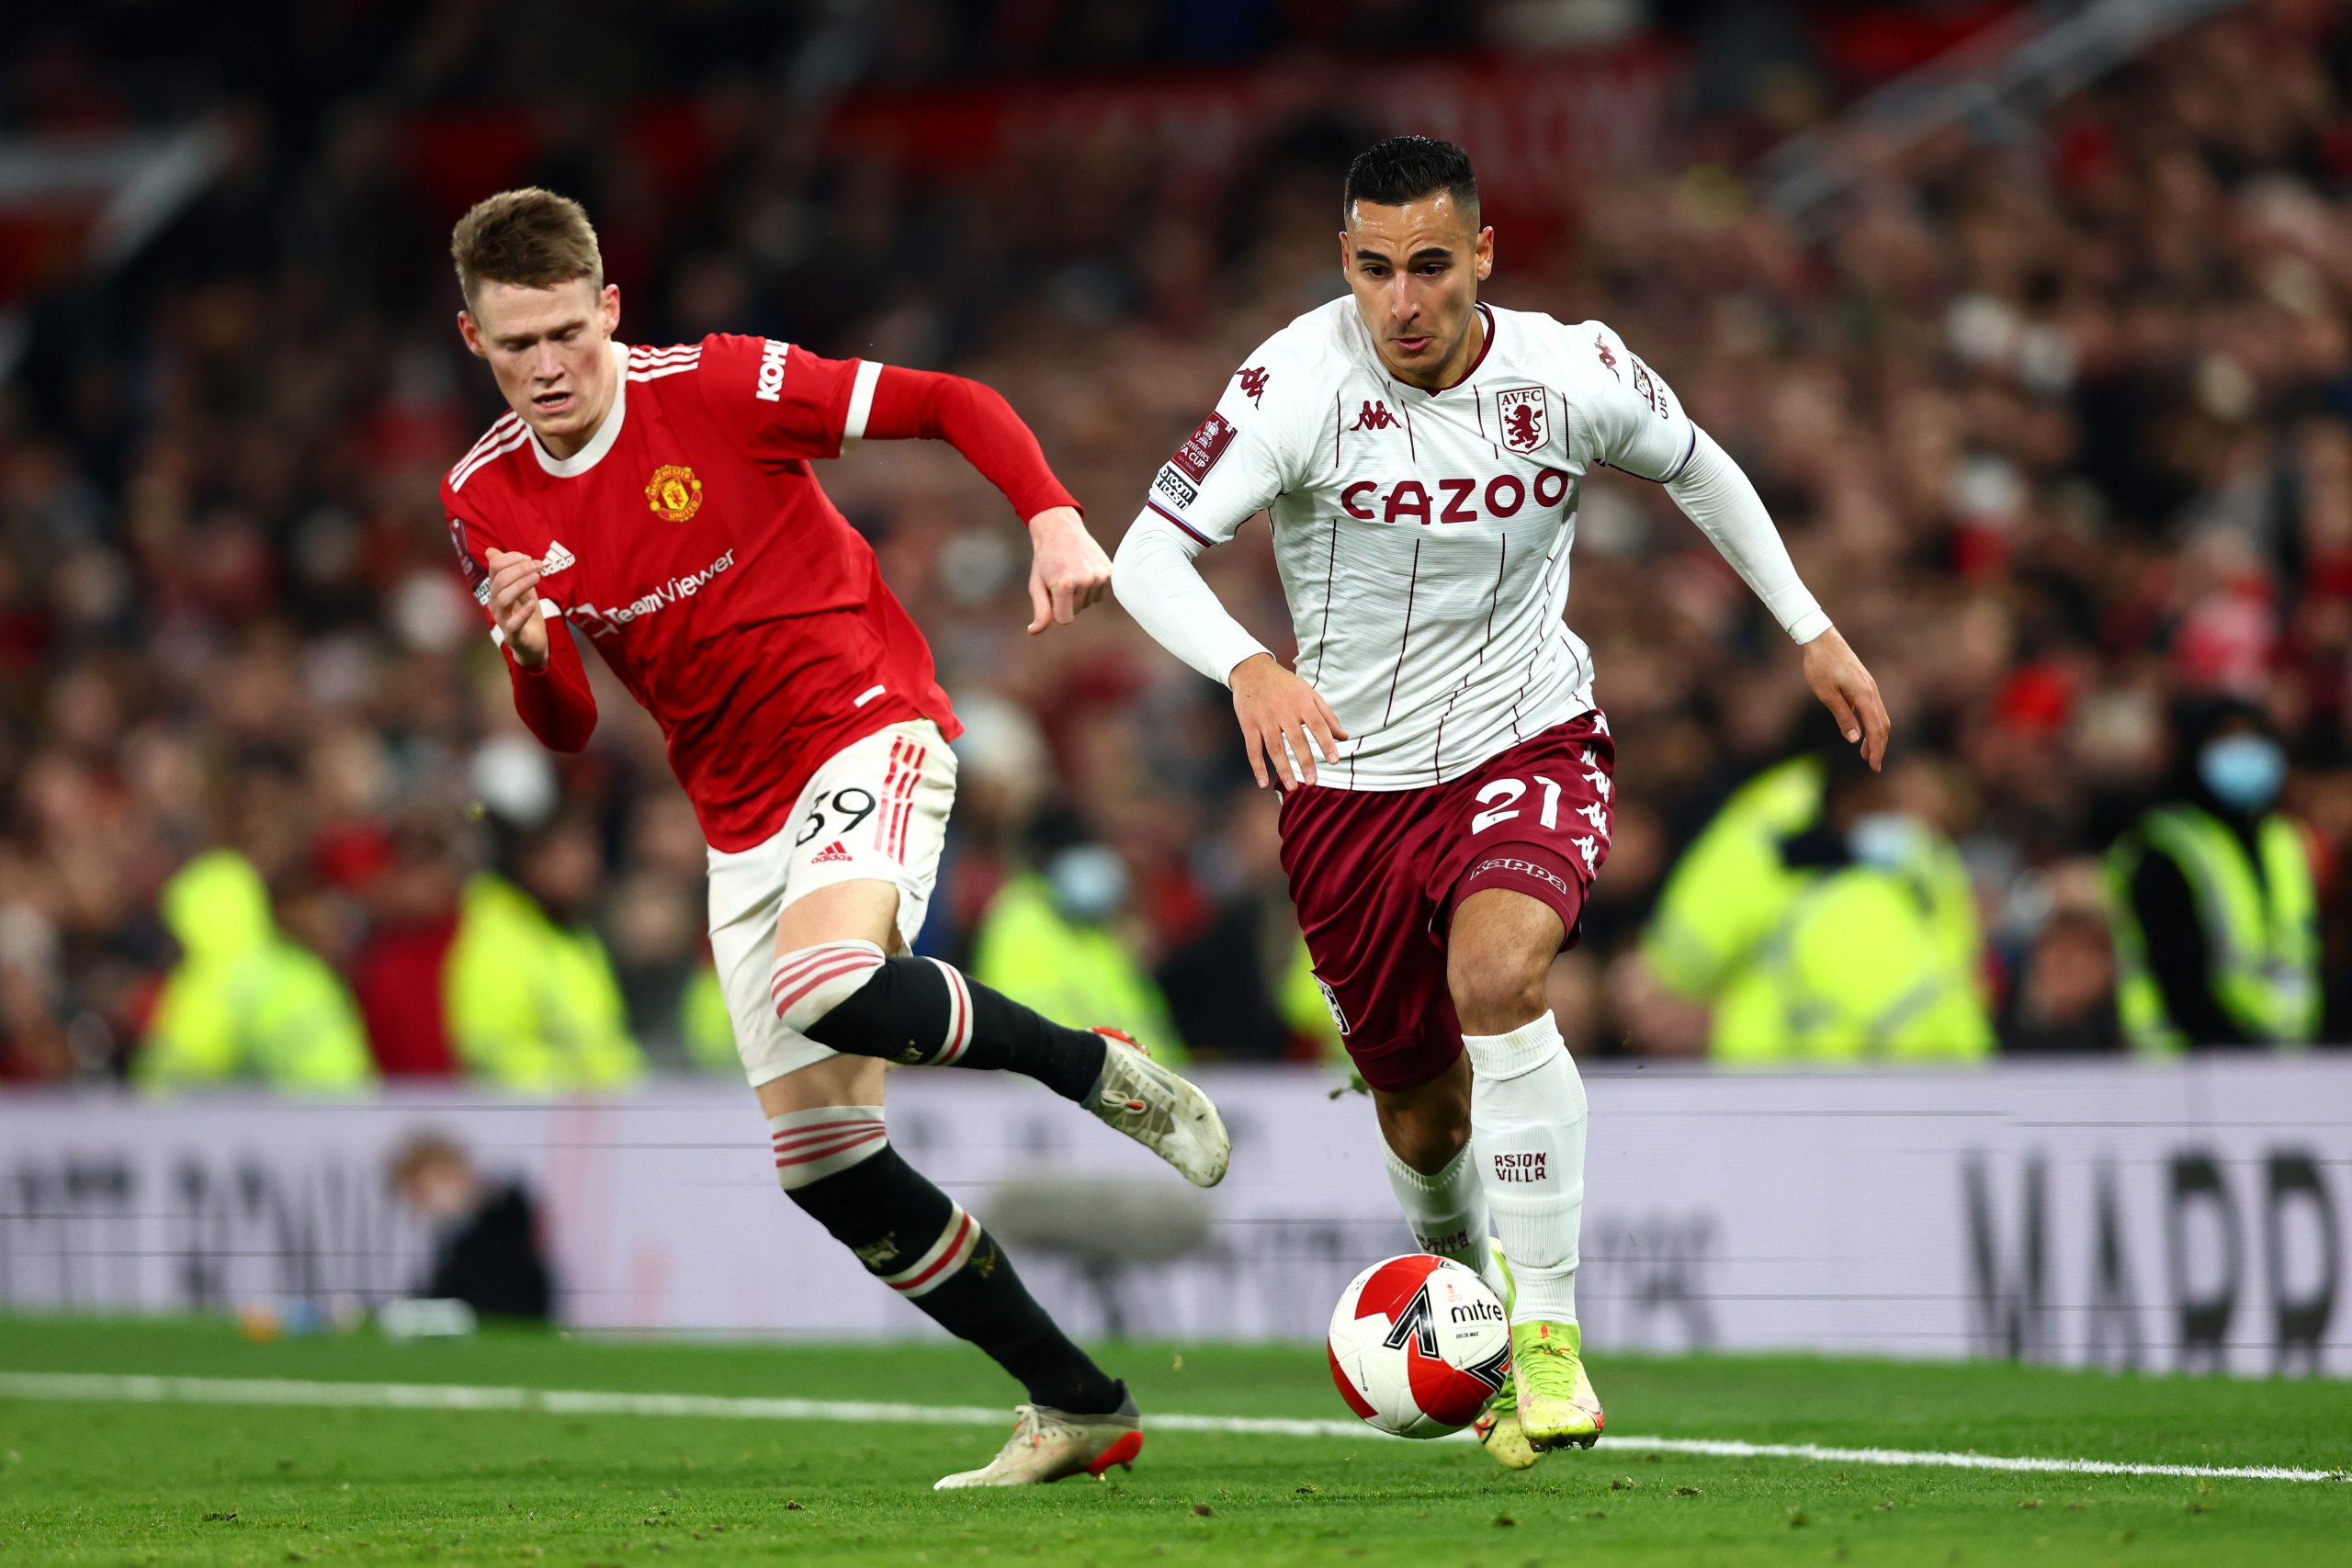 Scott McTominay starred in the victory against Aston Villa on Monday night.